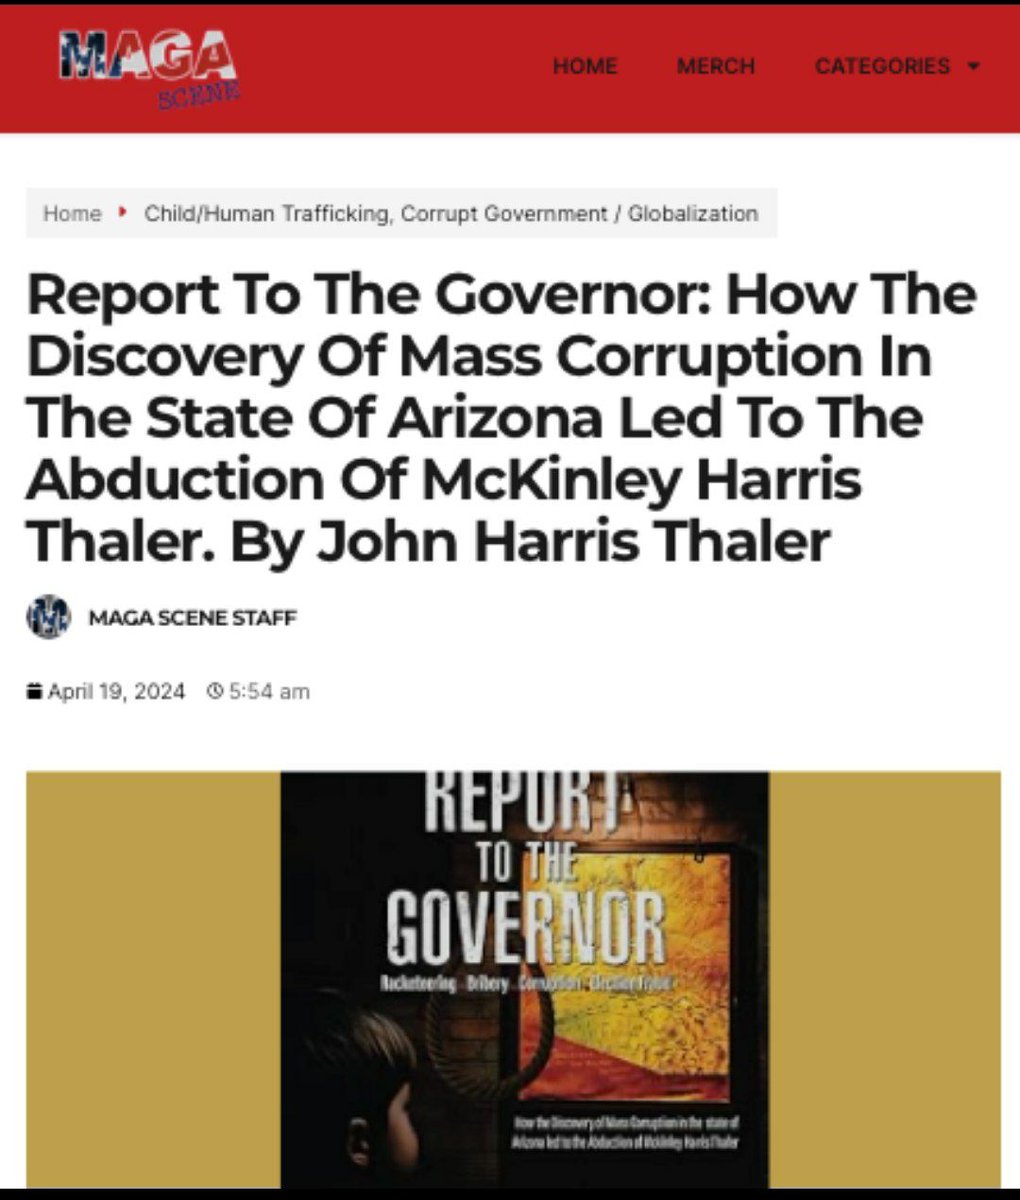 📌MAGA Scene 🇺🇸 #SAVEOURCHILDREN #DefundCPS Report To The Governor: How The Discovery Of Mass Corruption In The State Of Arizona Led To The Abduction Of McKinley Harris Thaler. By John Harris Thaler magascene.us/report-to-the-… @Thayleresq @ScottZPatriot @MAGA_Scene